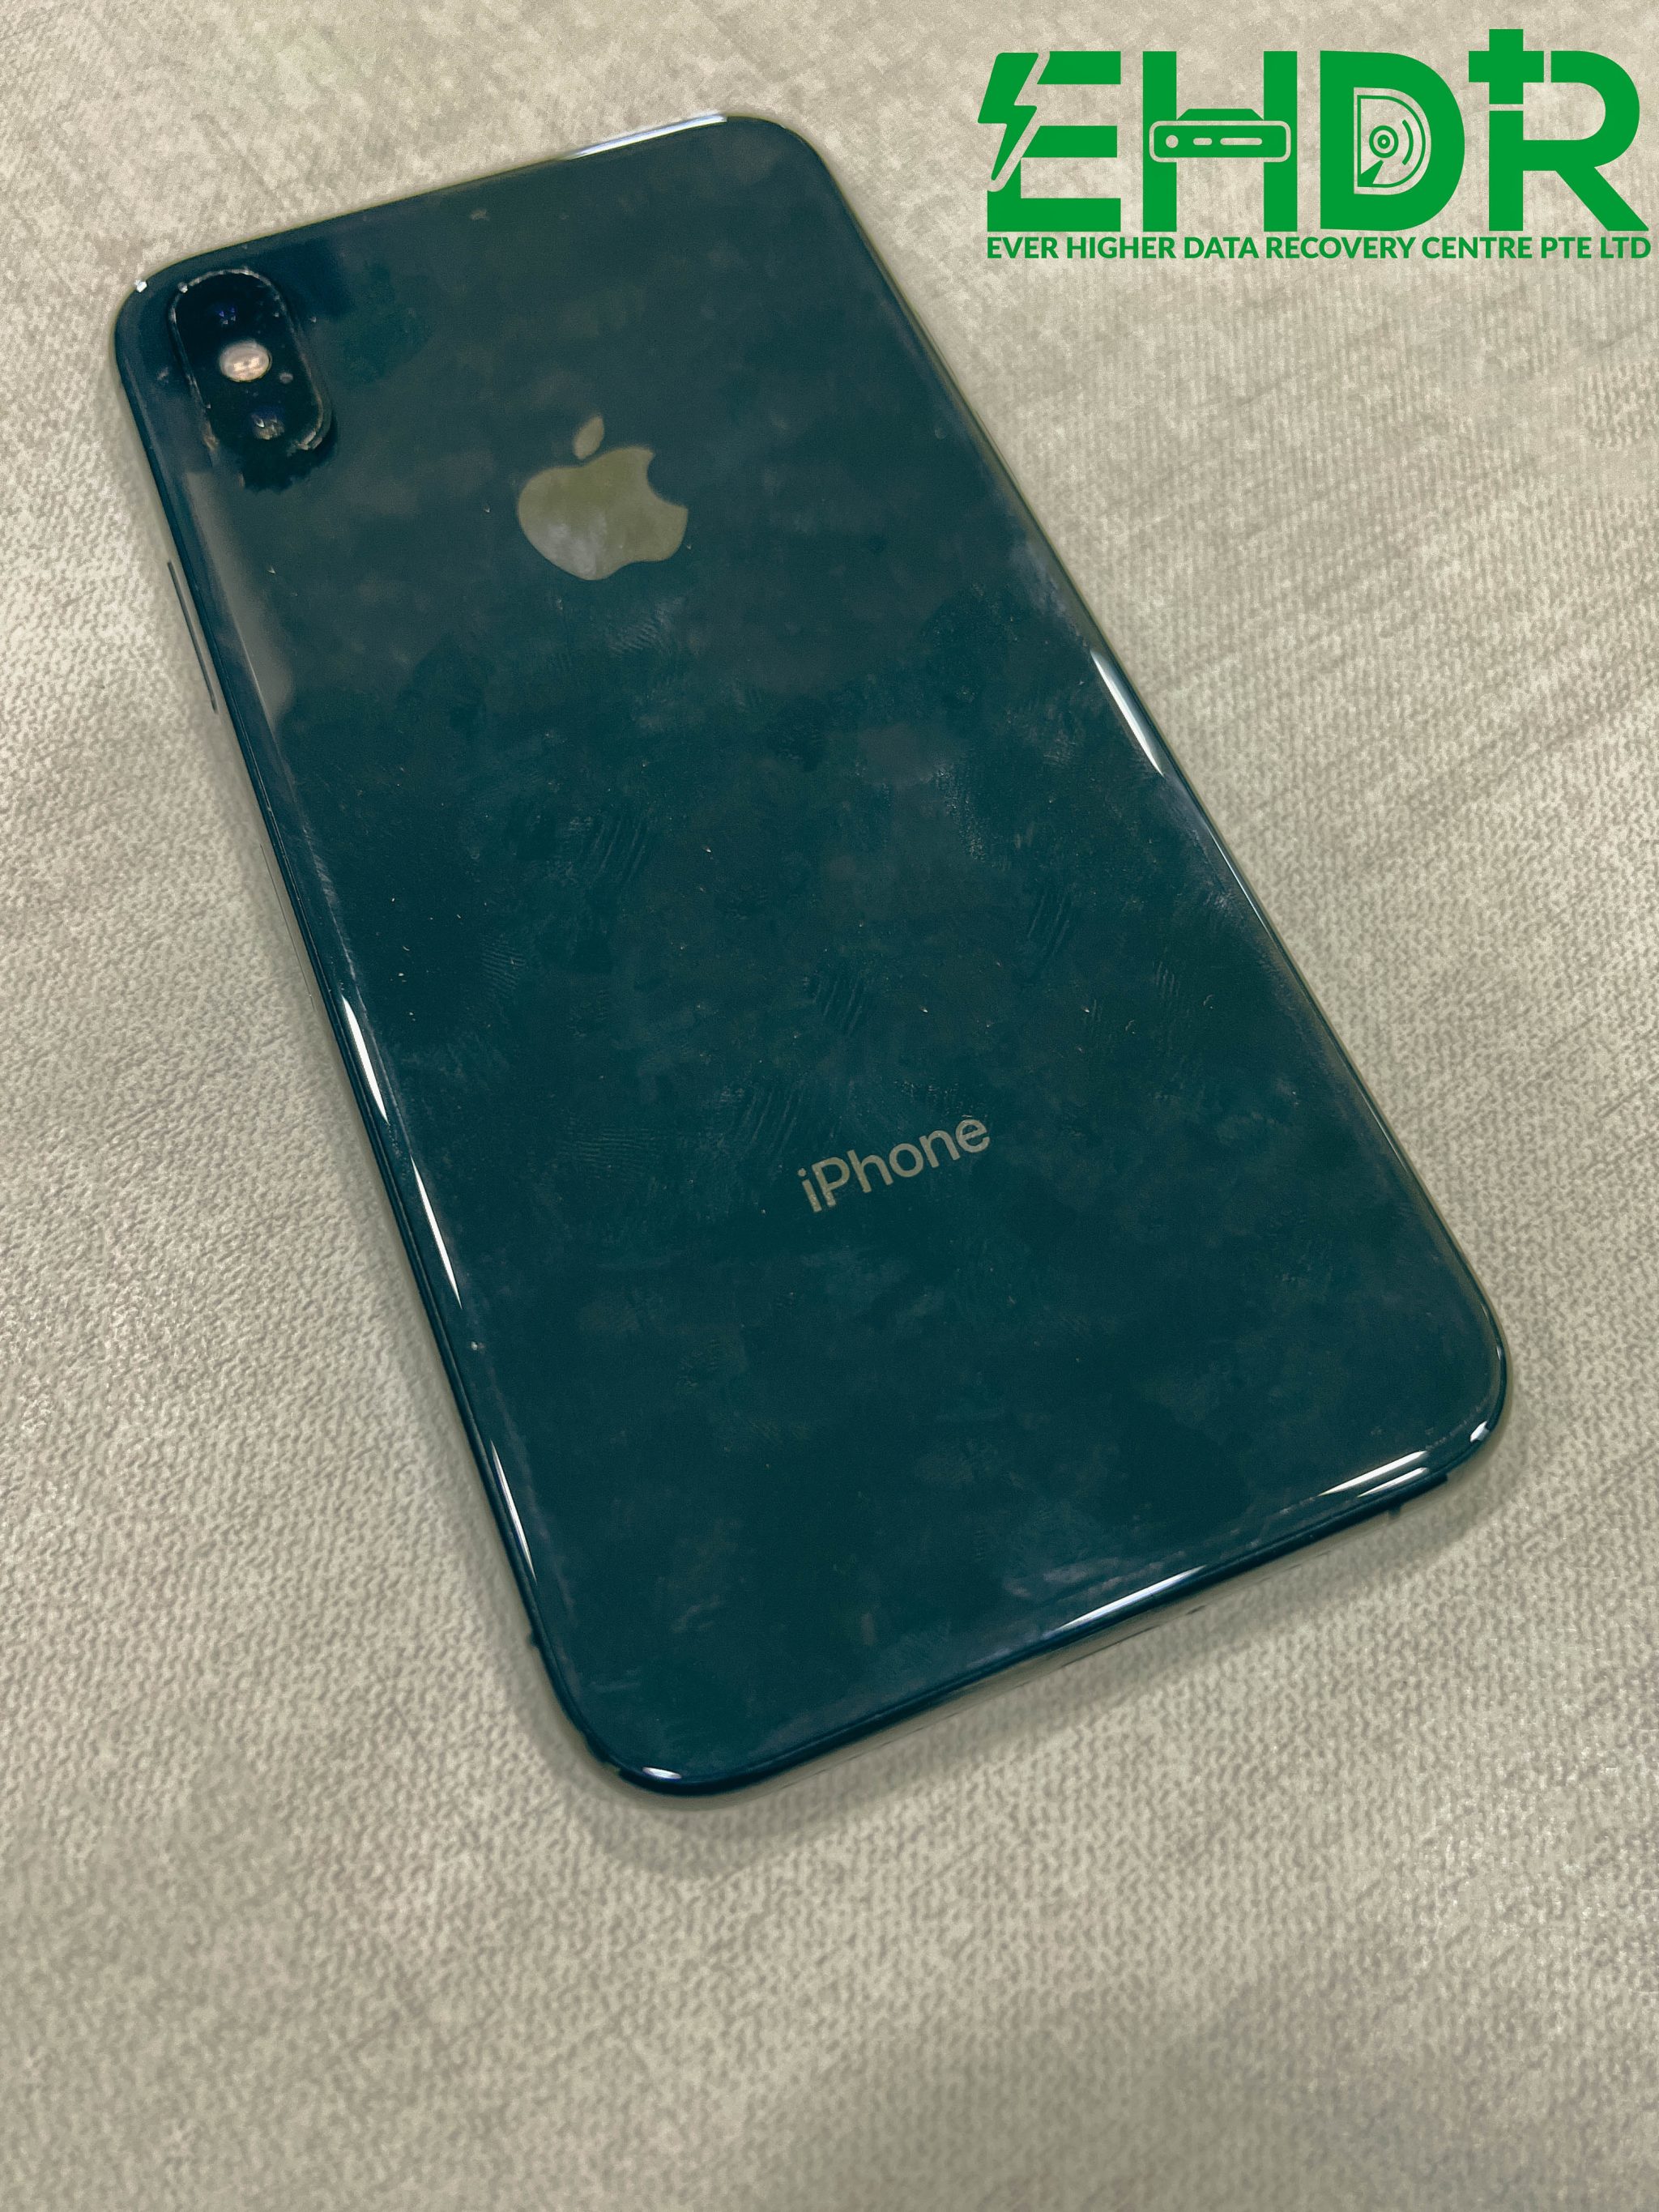 25 August 2022 – iPhone XS Data Recovery Singapore